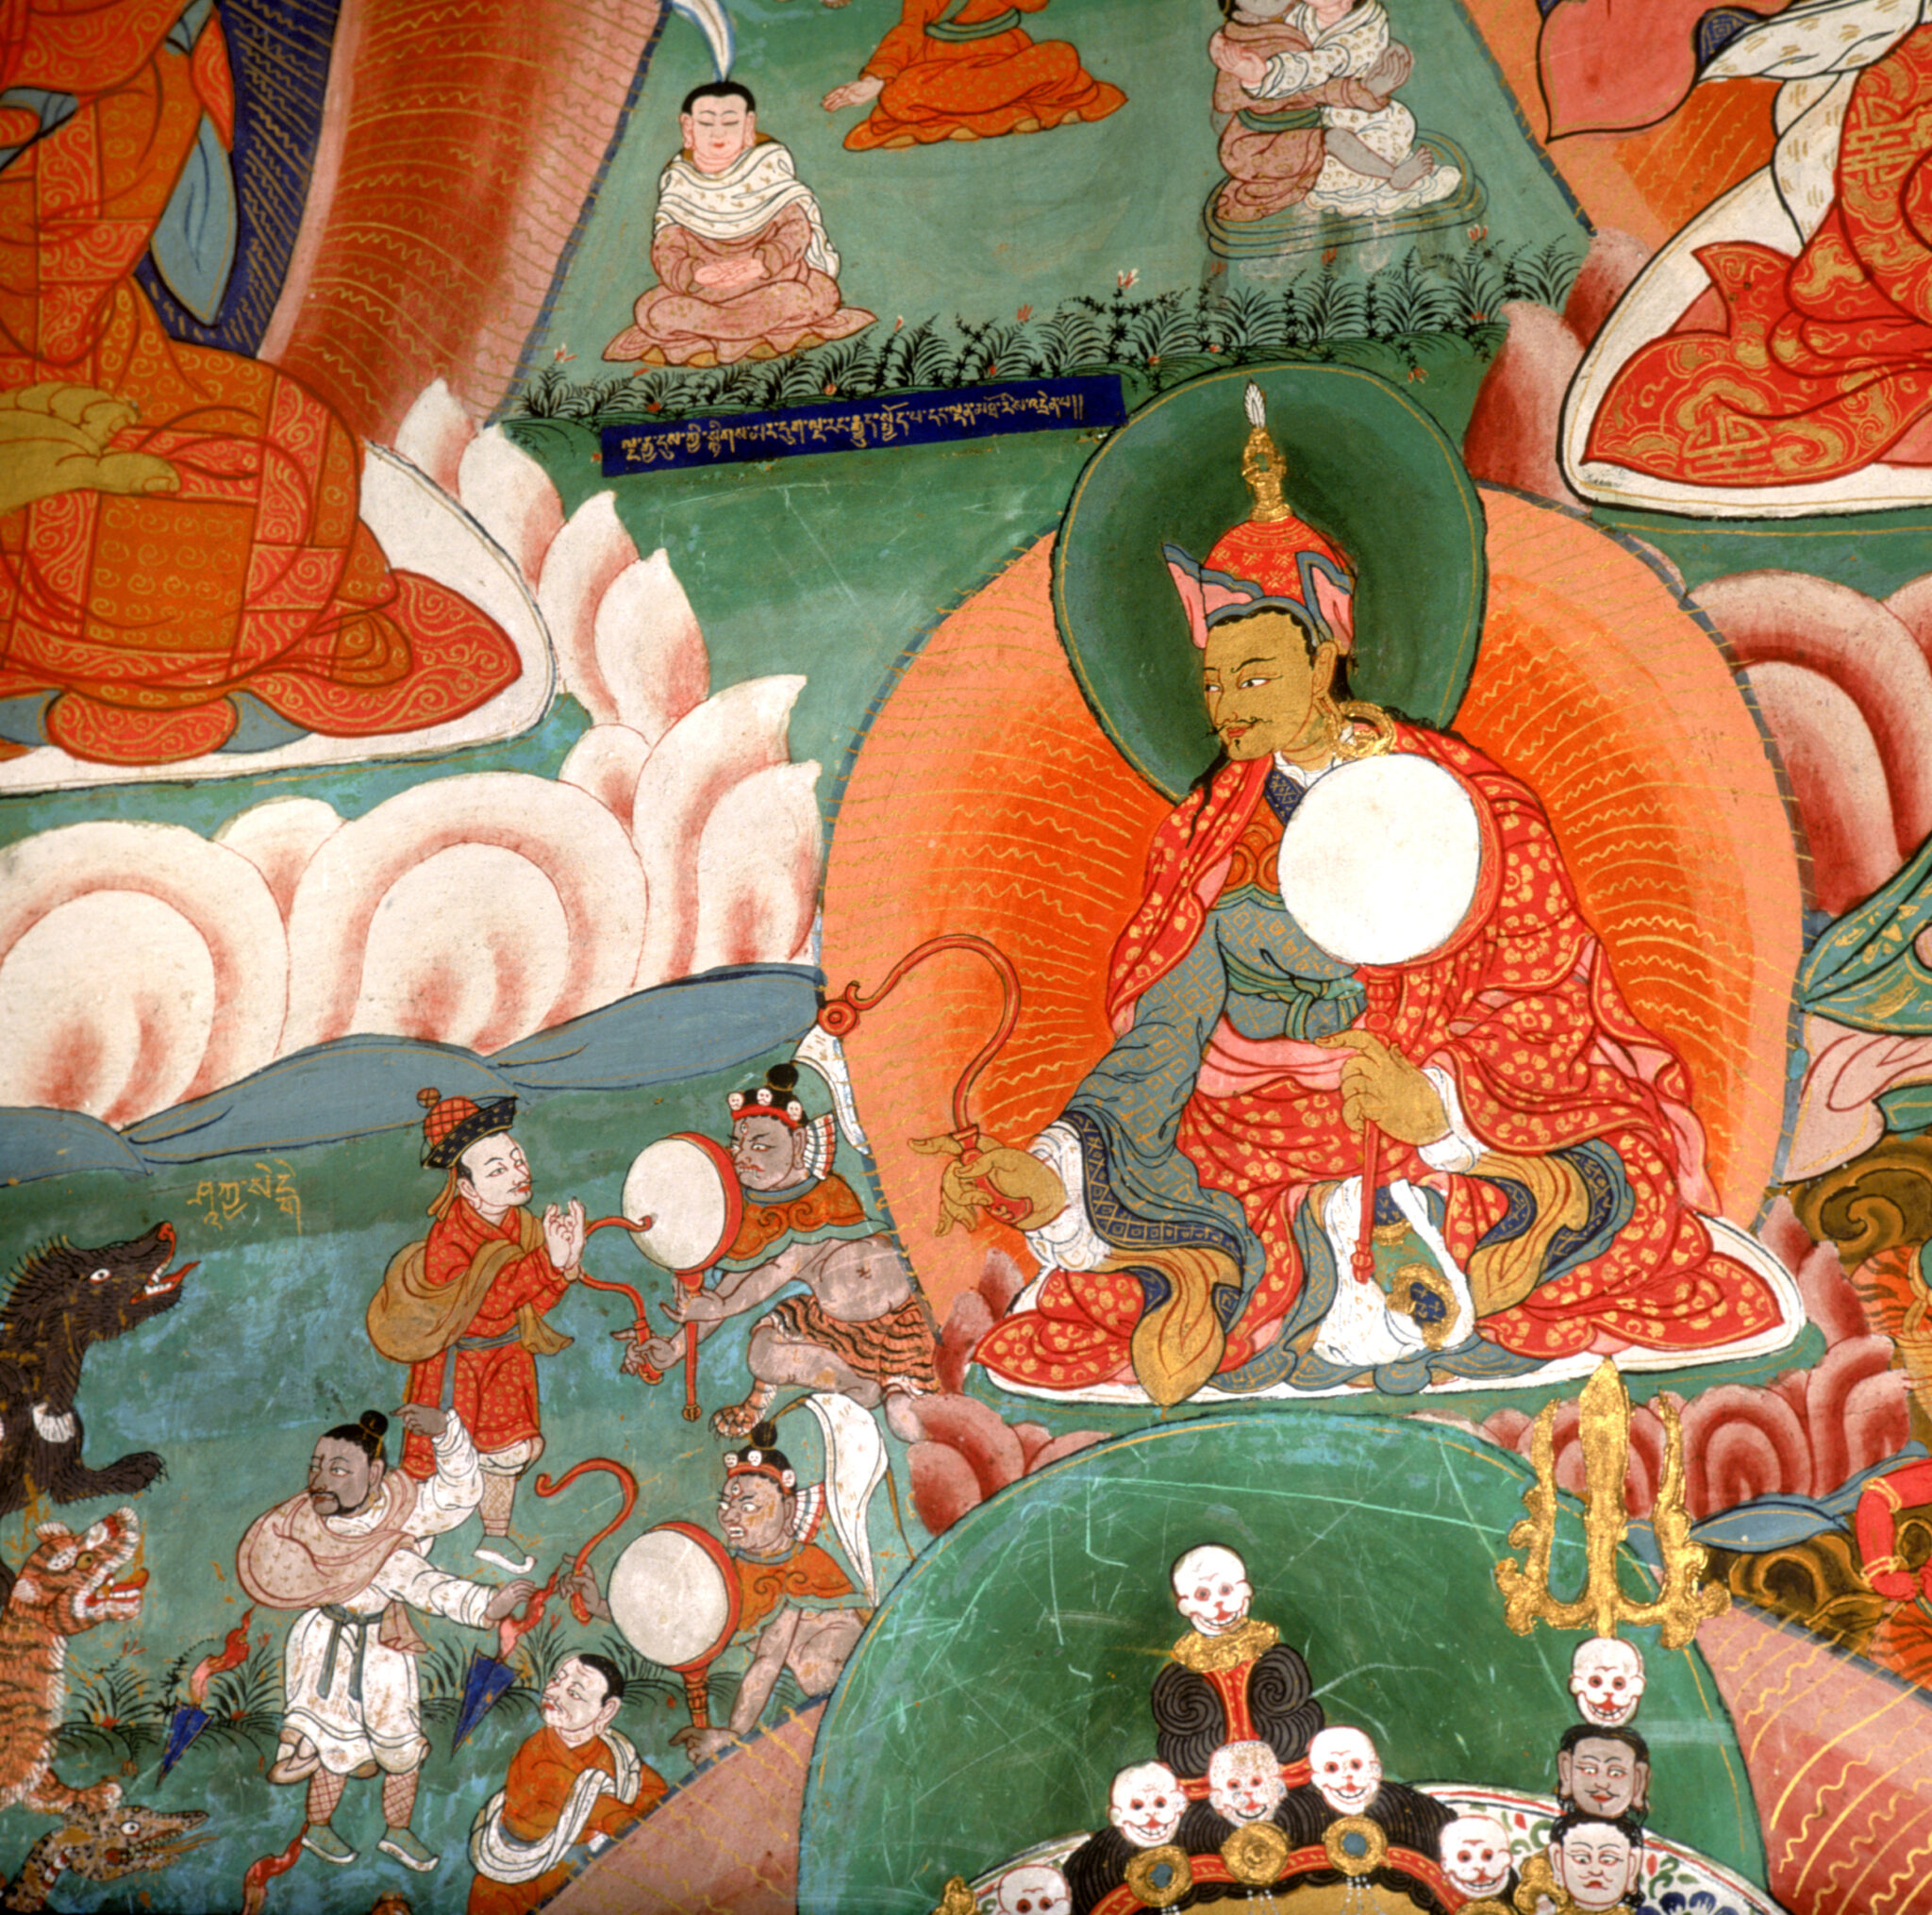 Guru wearing gold and red brocade robe and his attendants ward off animals attacking from left